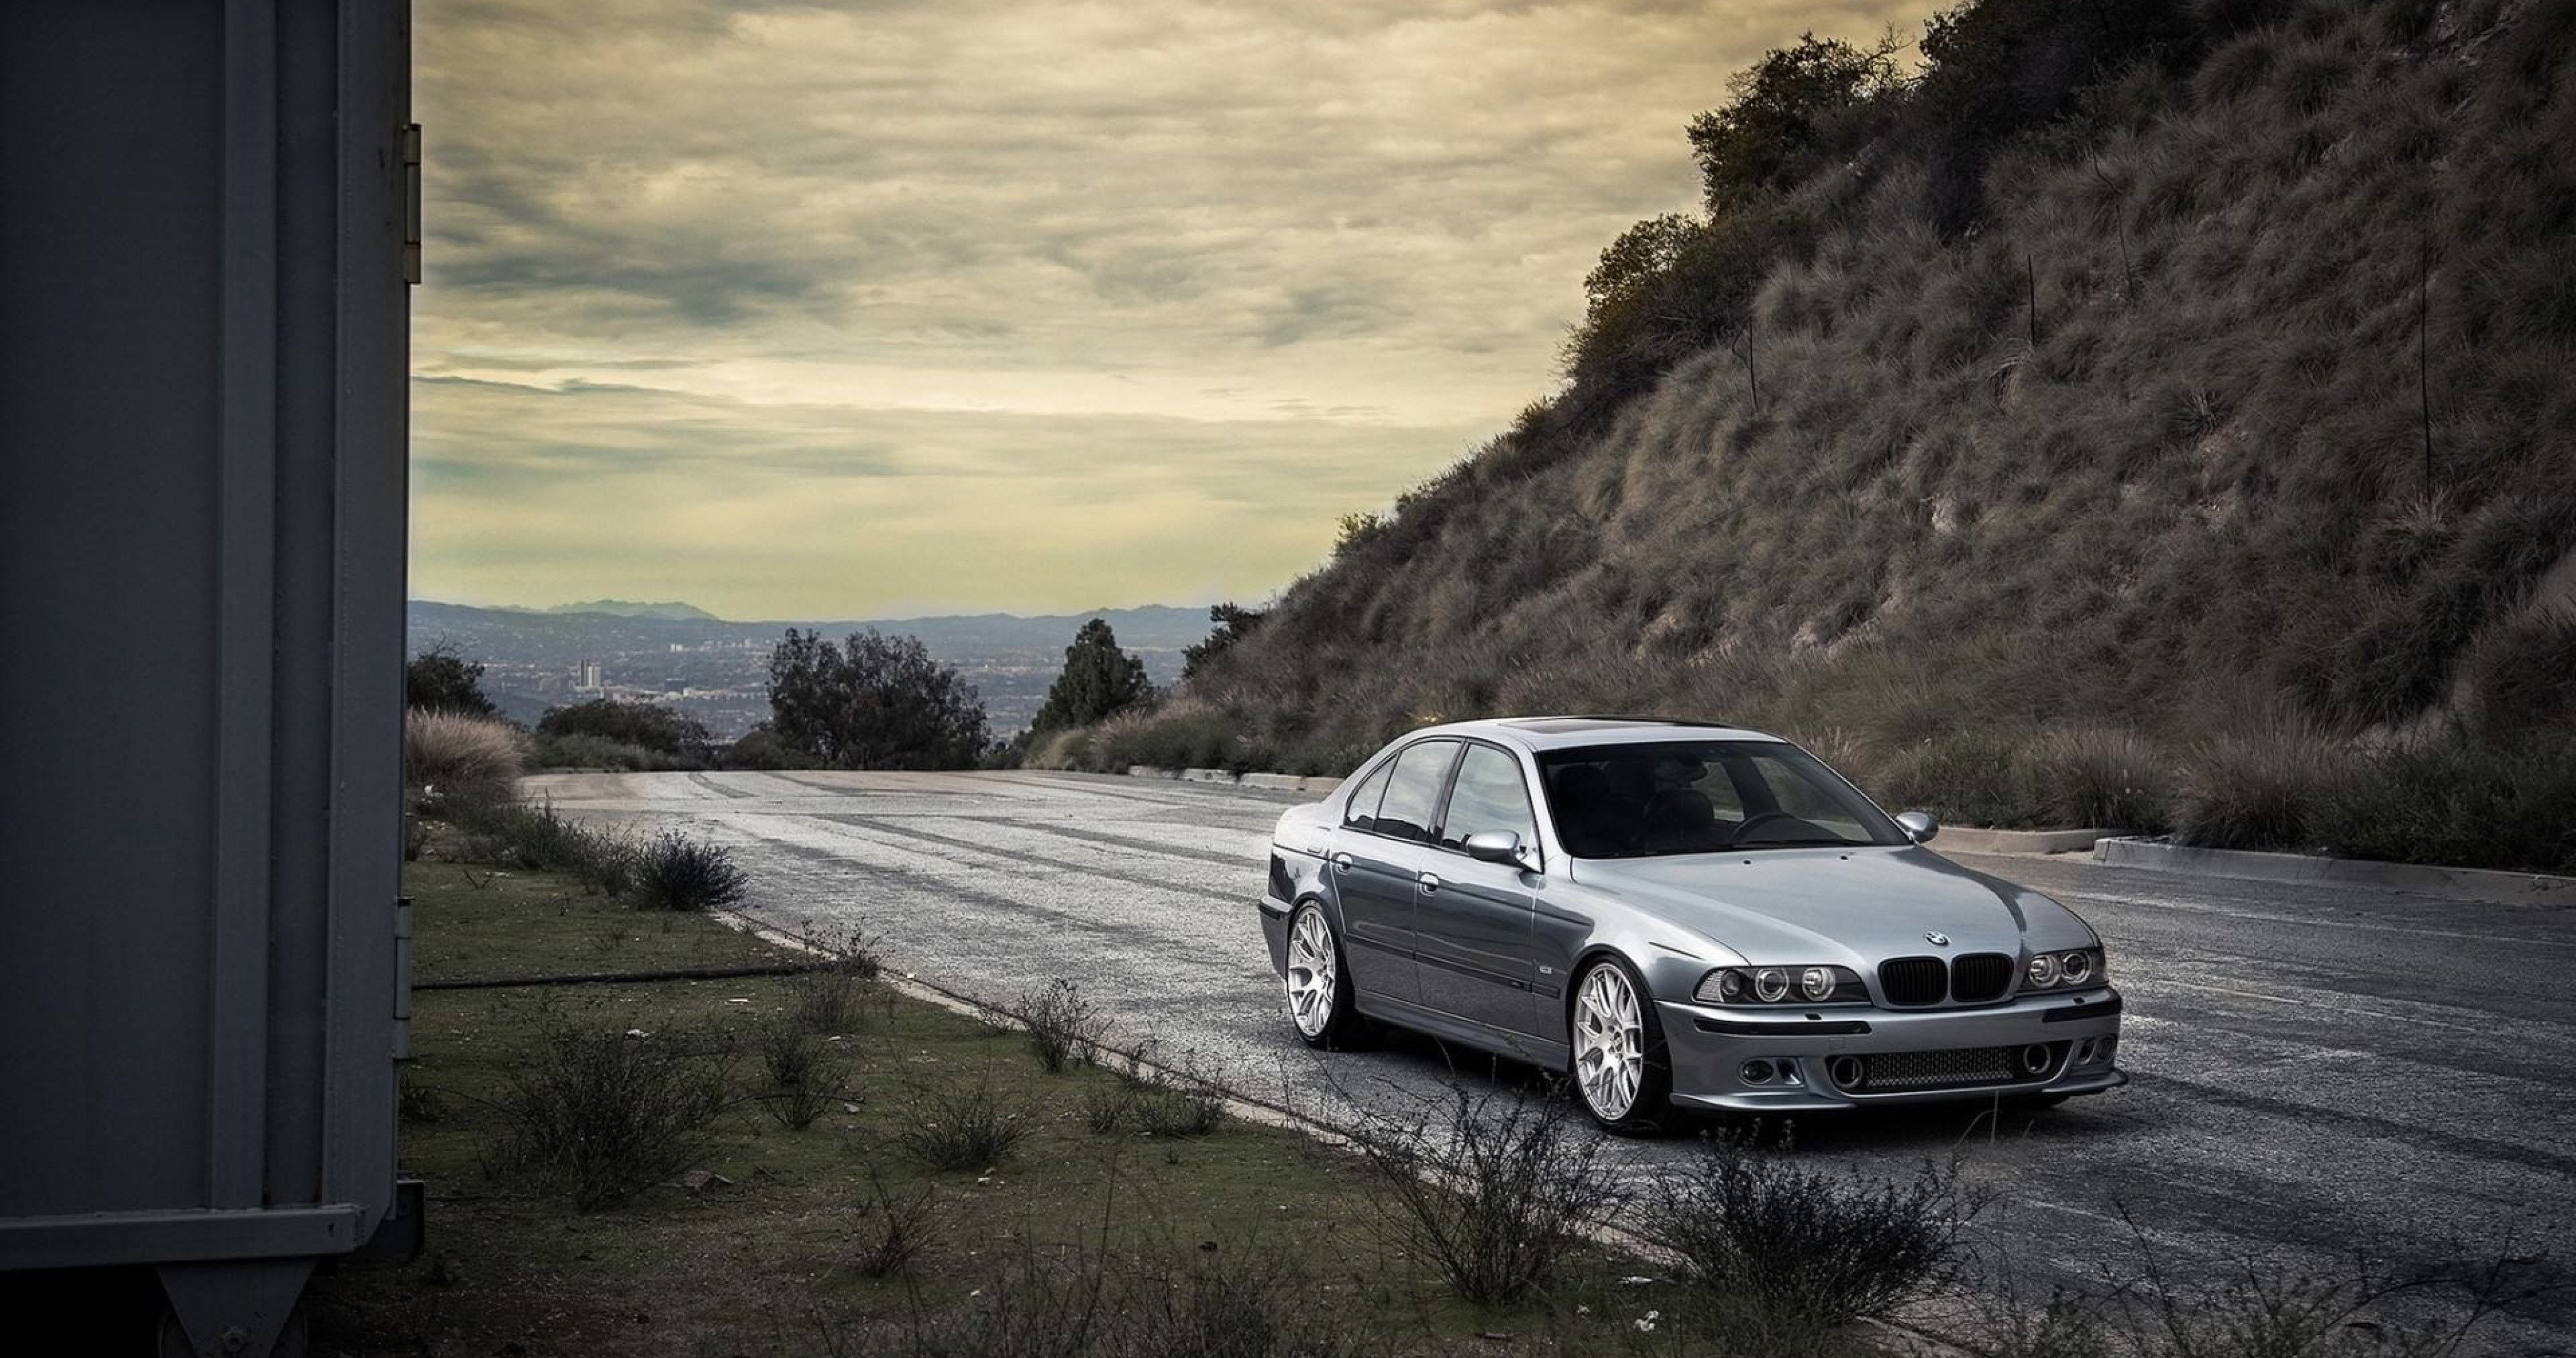 Bmw E39 Photos, Download The BEST Free Bmw E39 Stock Photos & HD Images